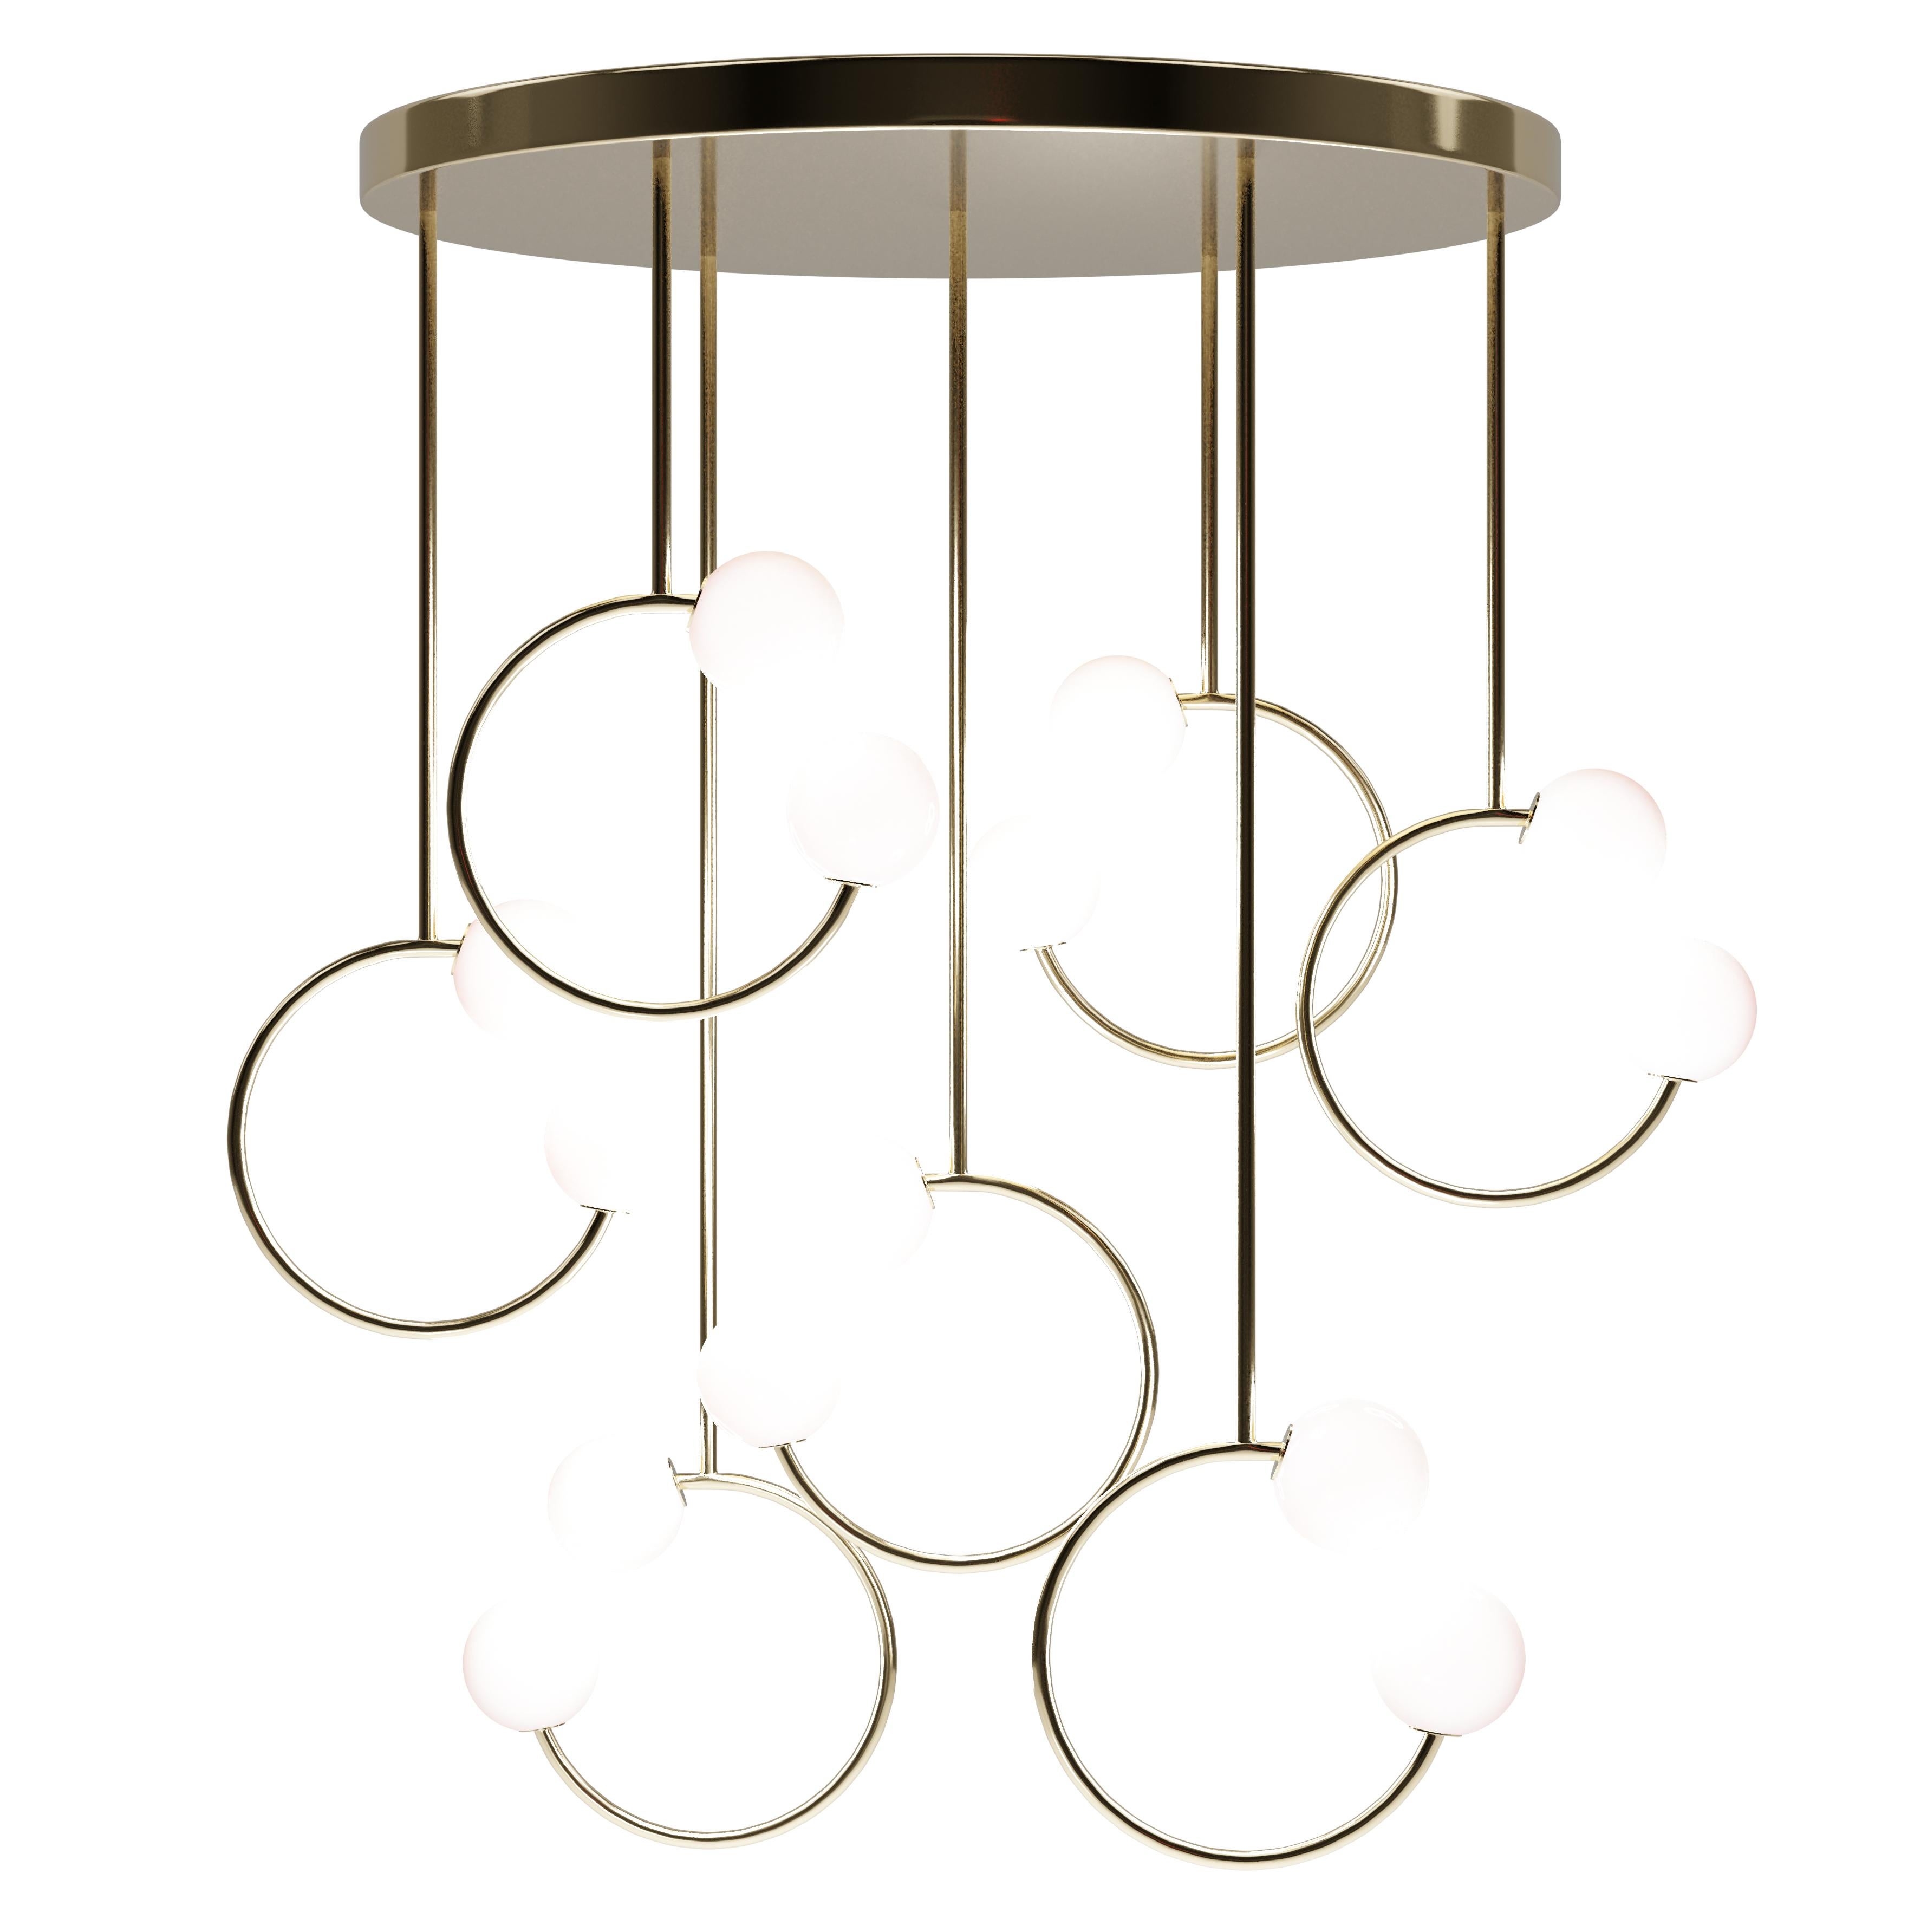 Gaby's Dream ceiling lamp, Royal Stranger
Dimensions: W 90 x D 90 x H 130 cm
Materials: Brass, Glass.

FINISH OPTIONS
Body Available in brass, stainless steel and copper with polished or brushed finish, or lacquered in all NCS/RAL colors with matte